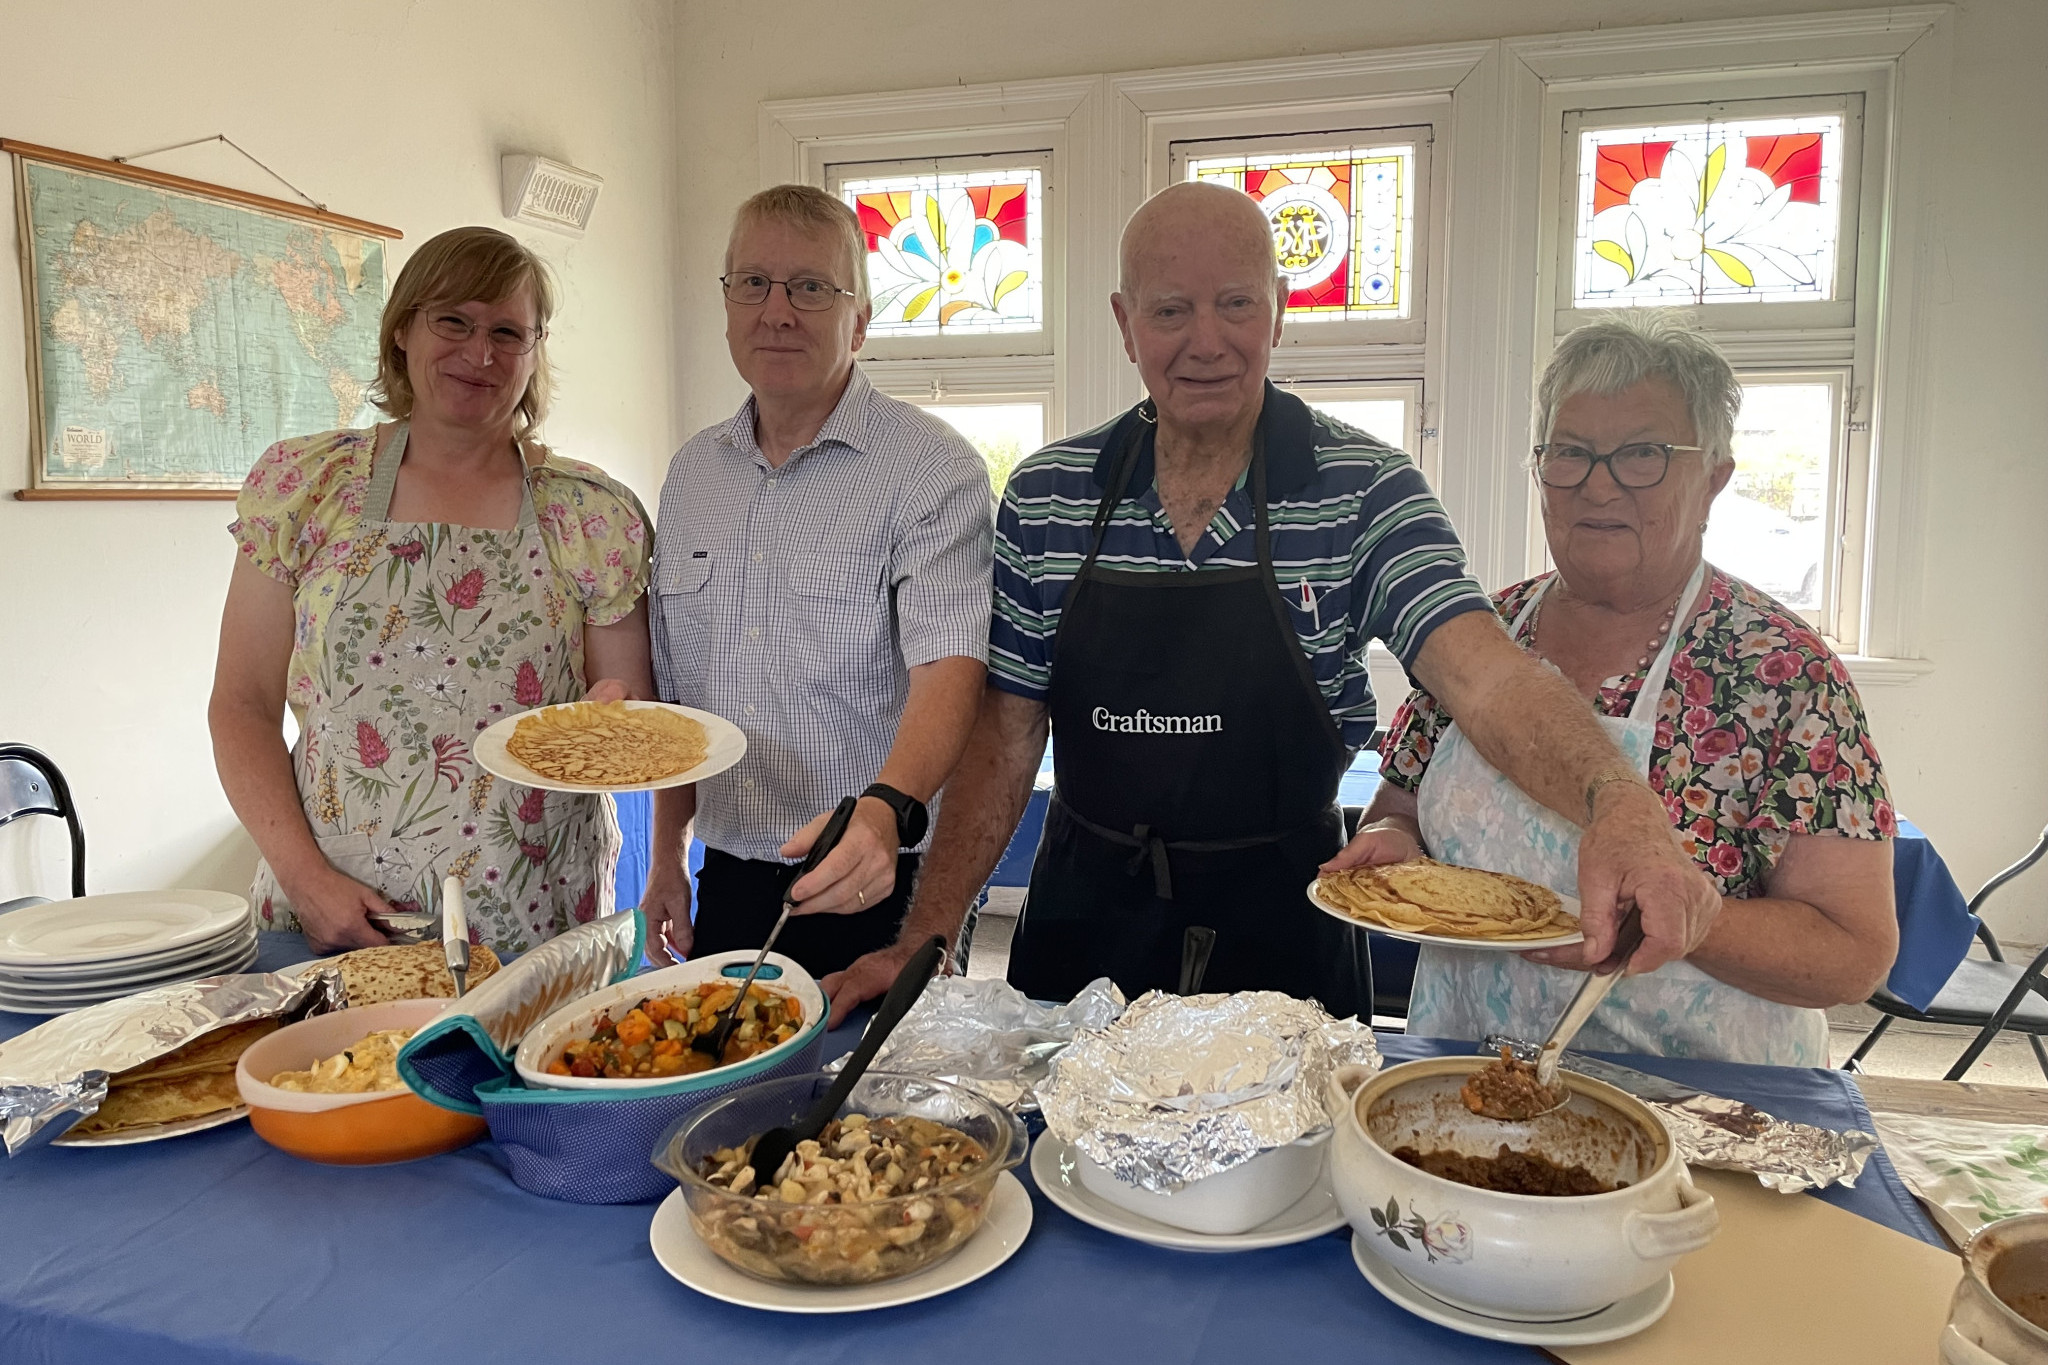 Saint Paul Anglican Church members helped feed about 80 people at this week’s Shrove Tuesday event in Camperdown.